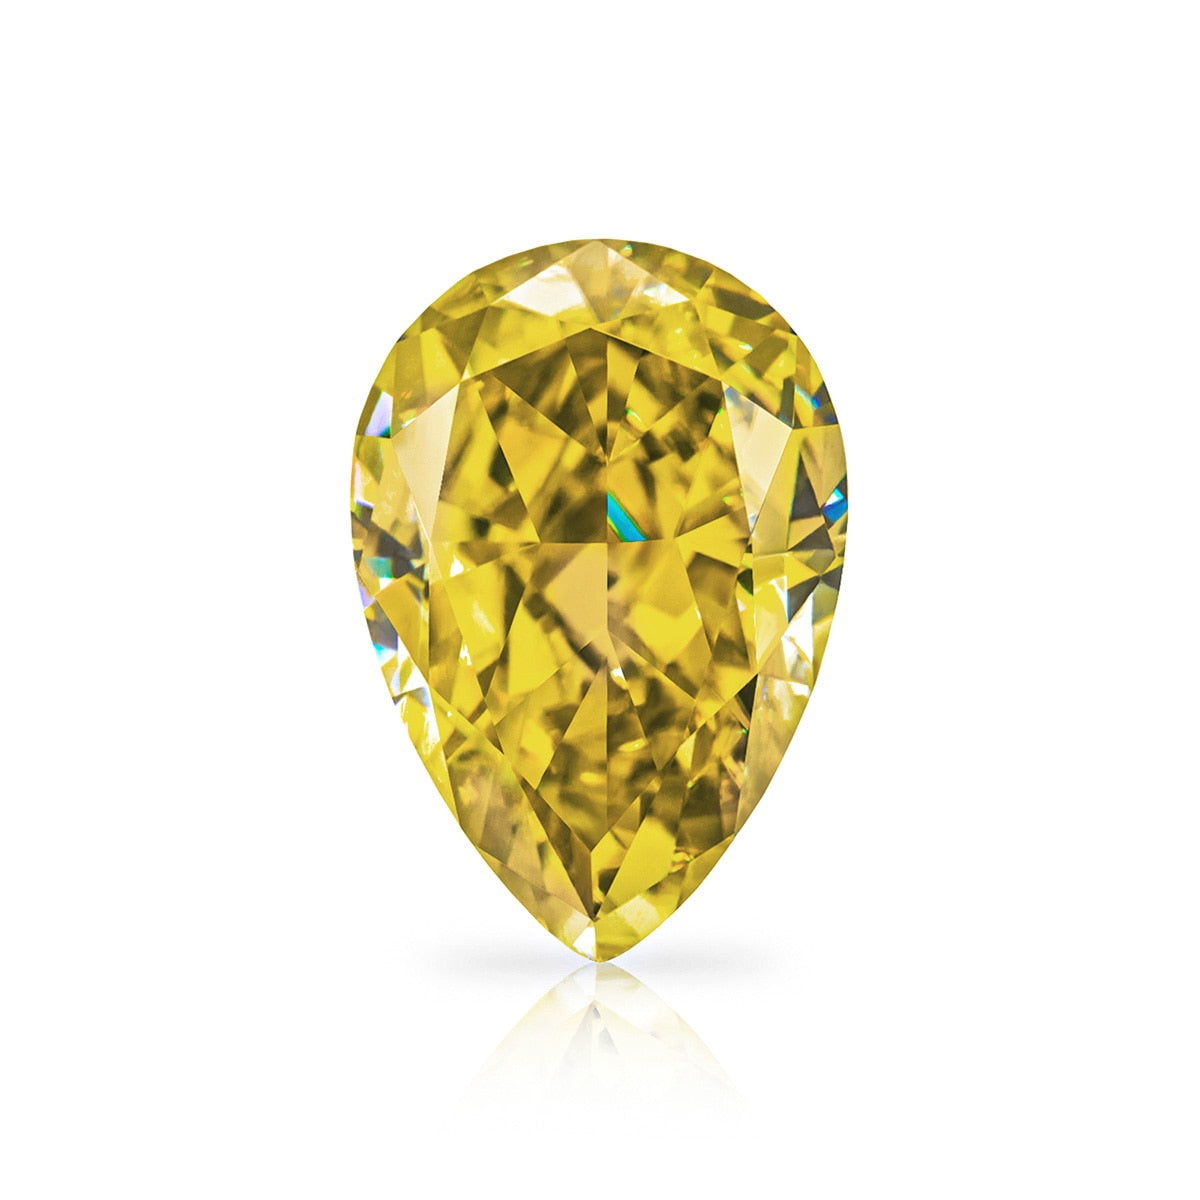 Light Yellow Color. Genuine Moissanite. 1.0 to 5.0 Carat. All Shapes Moissanite.